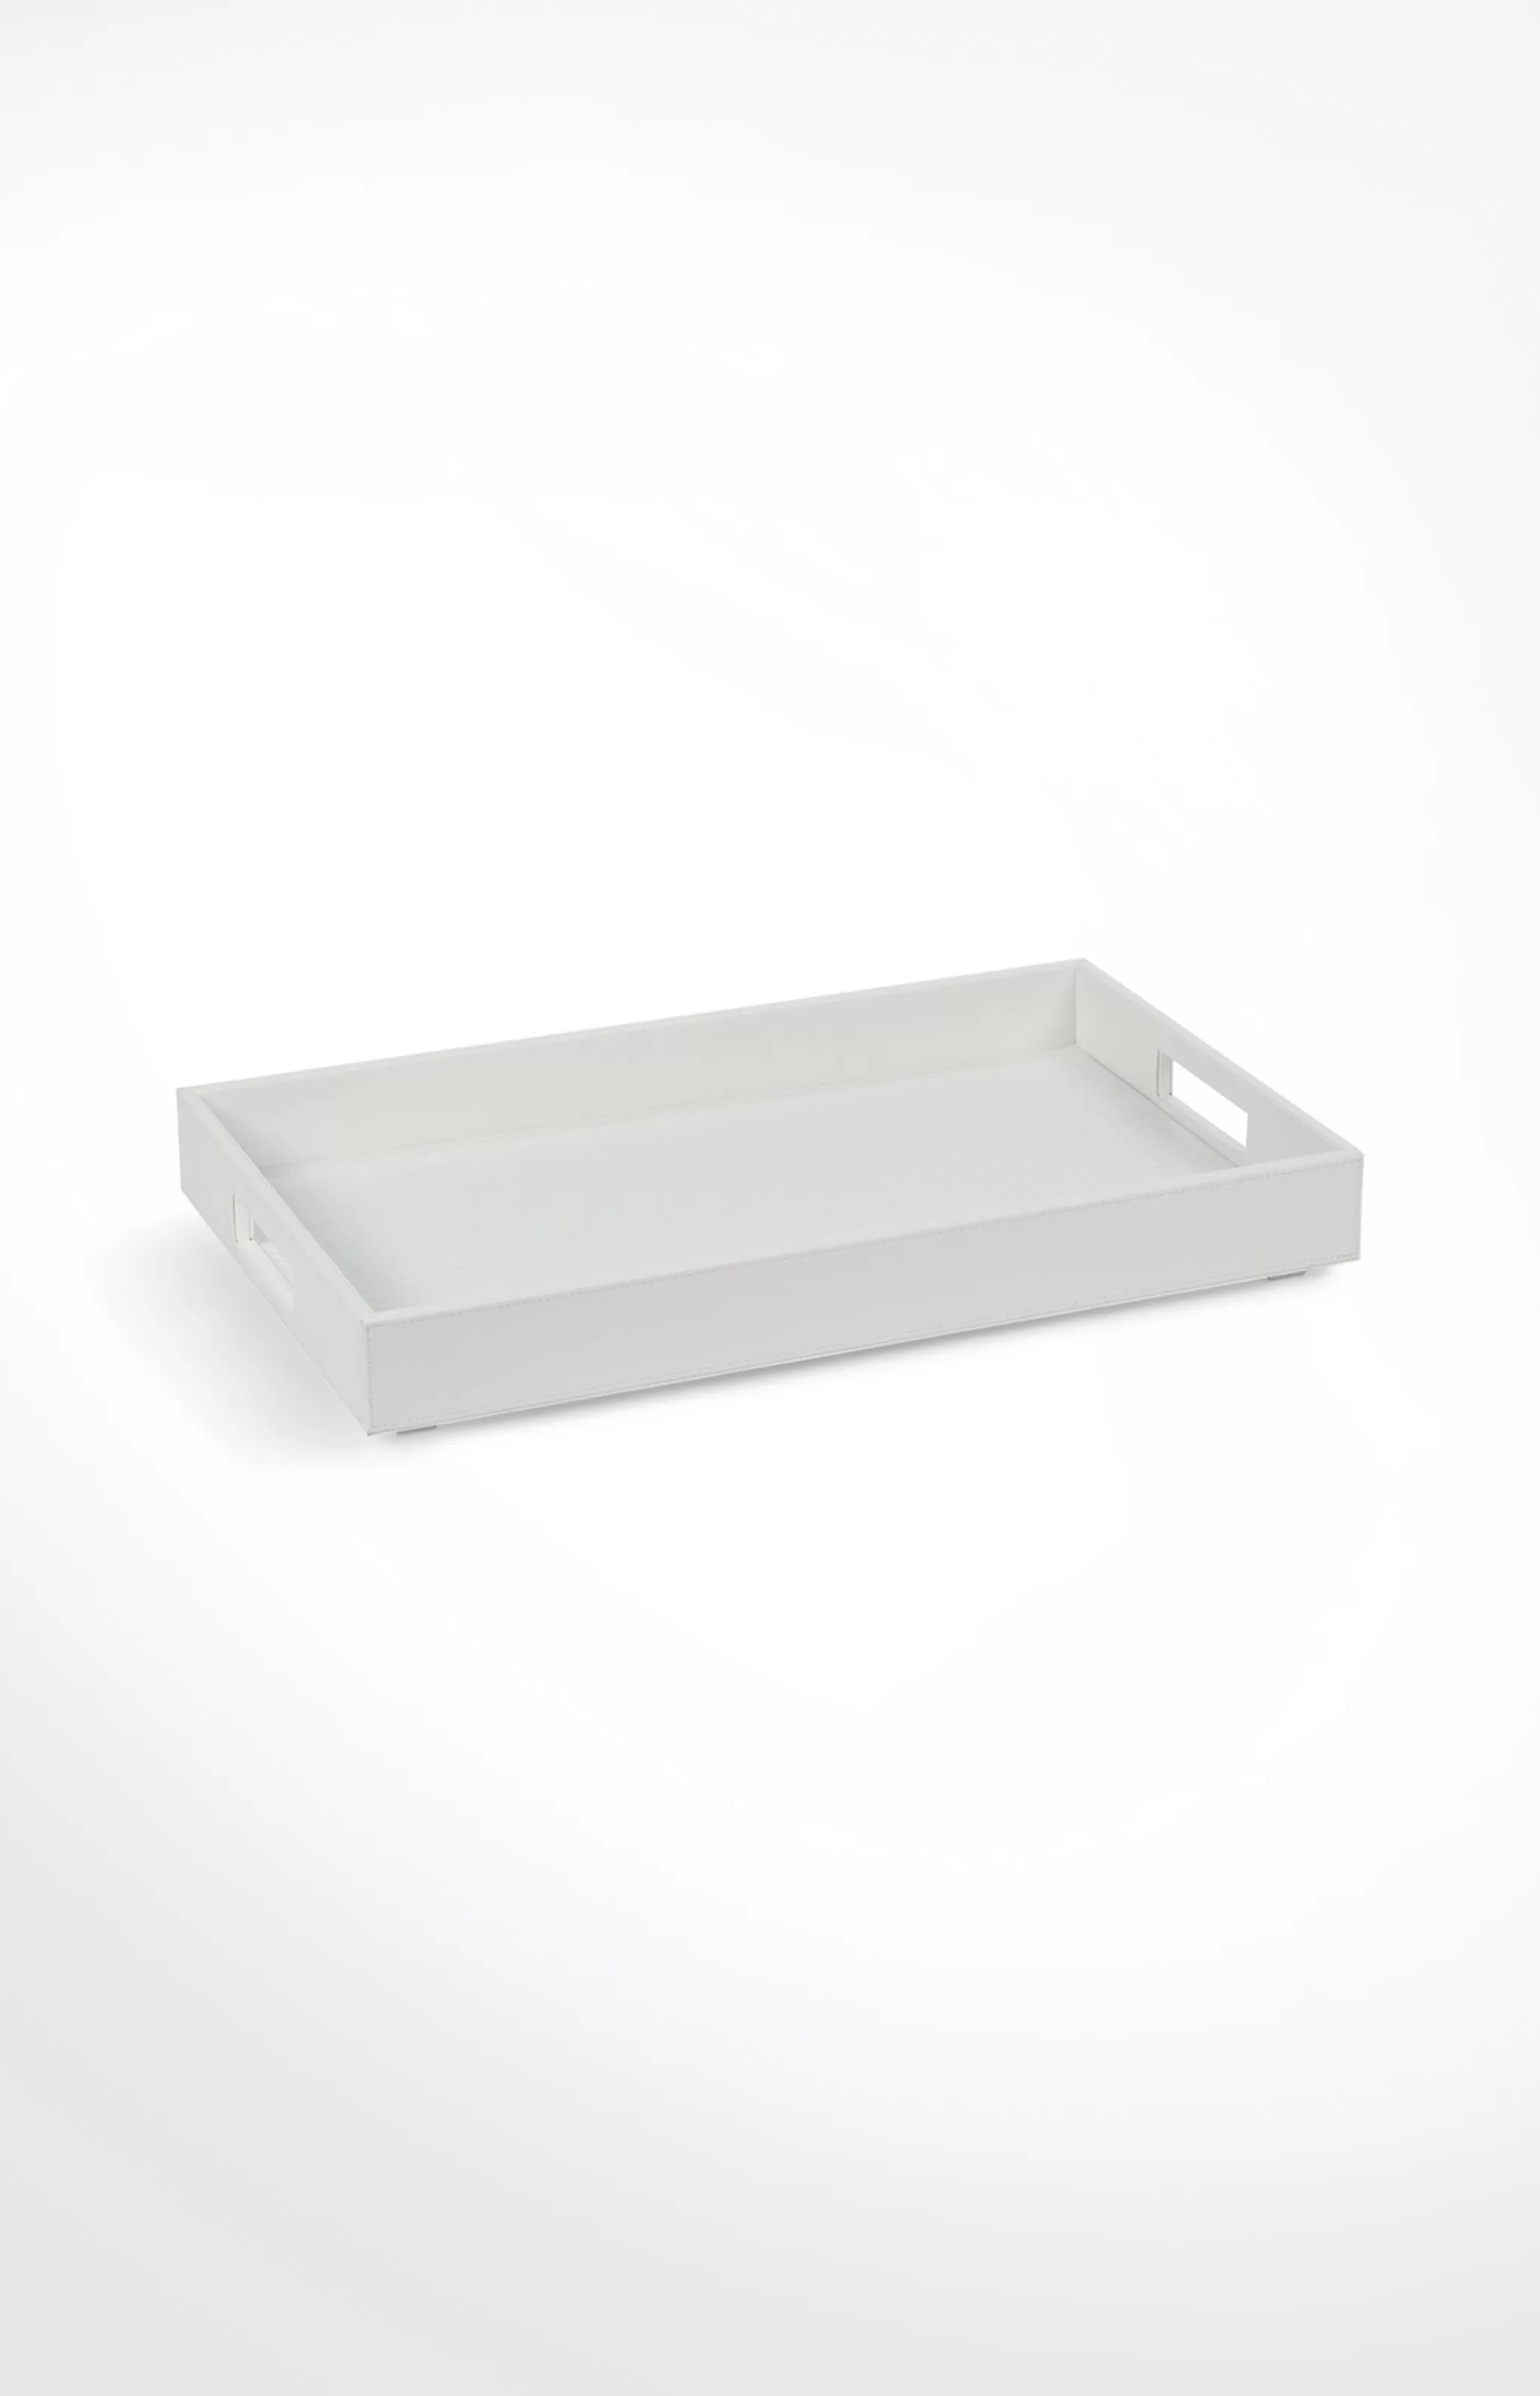 Bathroom Accessories | Discover Everything | Home Accessories | Table Accessories*JOOP Bathroom Accessories | Discover Everything | Home Accessories | Table Accessories Homeline tray, white